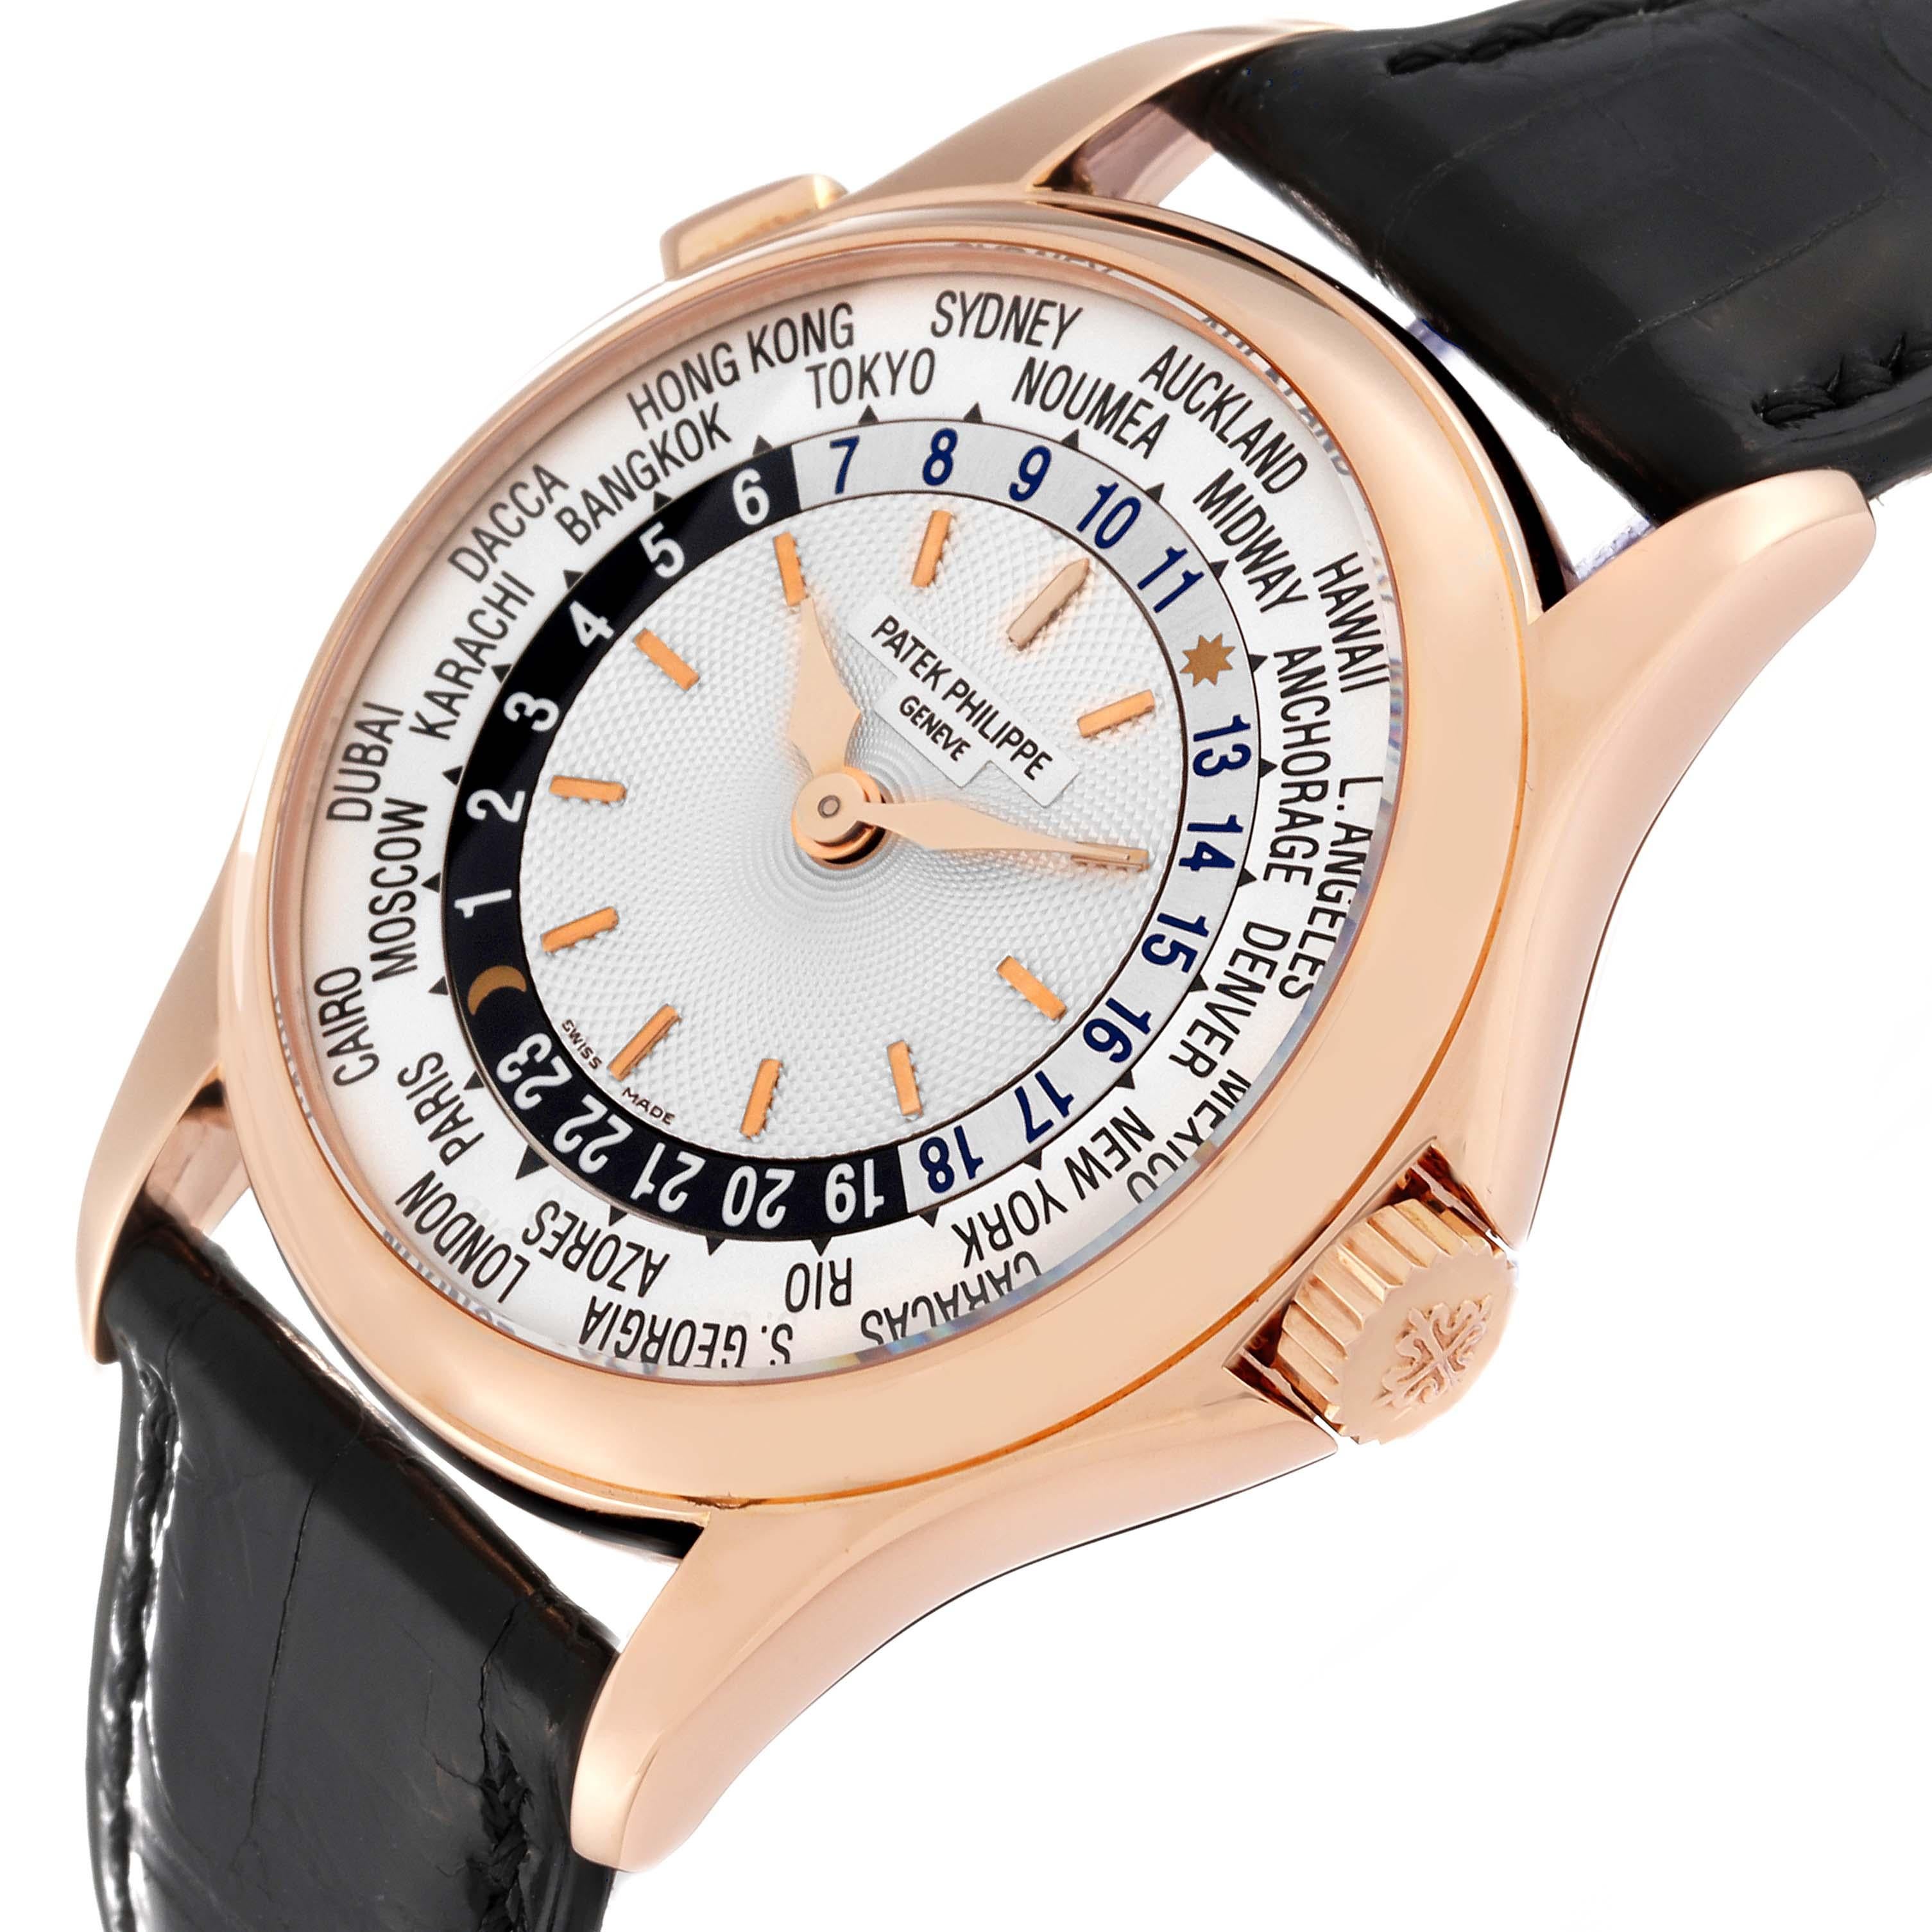 Men's Patek Philippe World Time Automatic Silver Dial Rose Gold Mens Watch 5110 For Sale